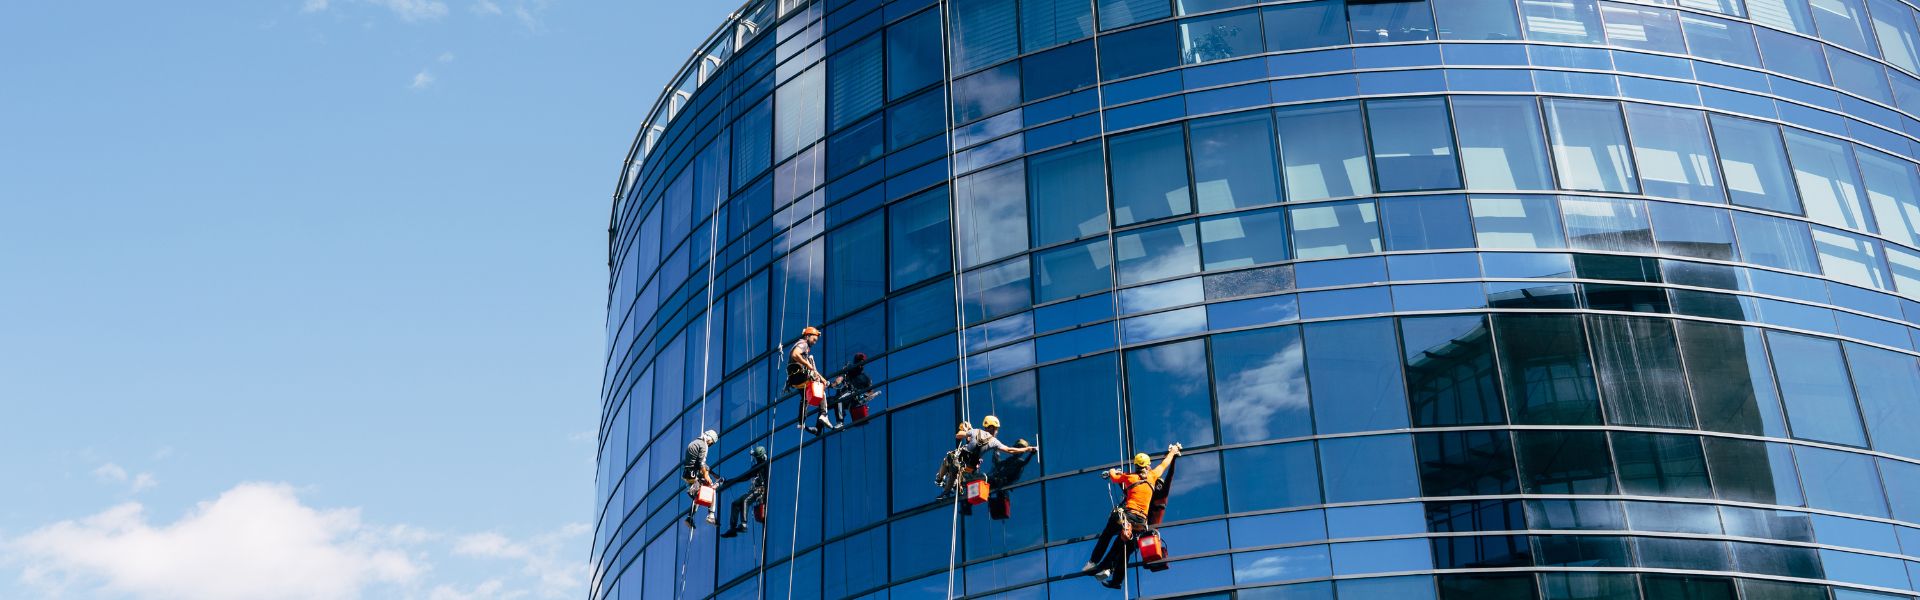 Window Cleaning Cost in Toronto | Price Estimate For Professional Window Cleaning Services